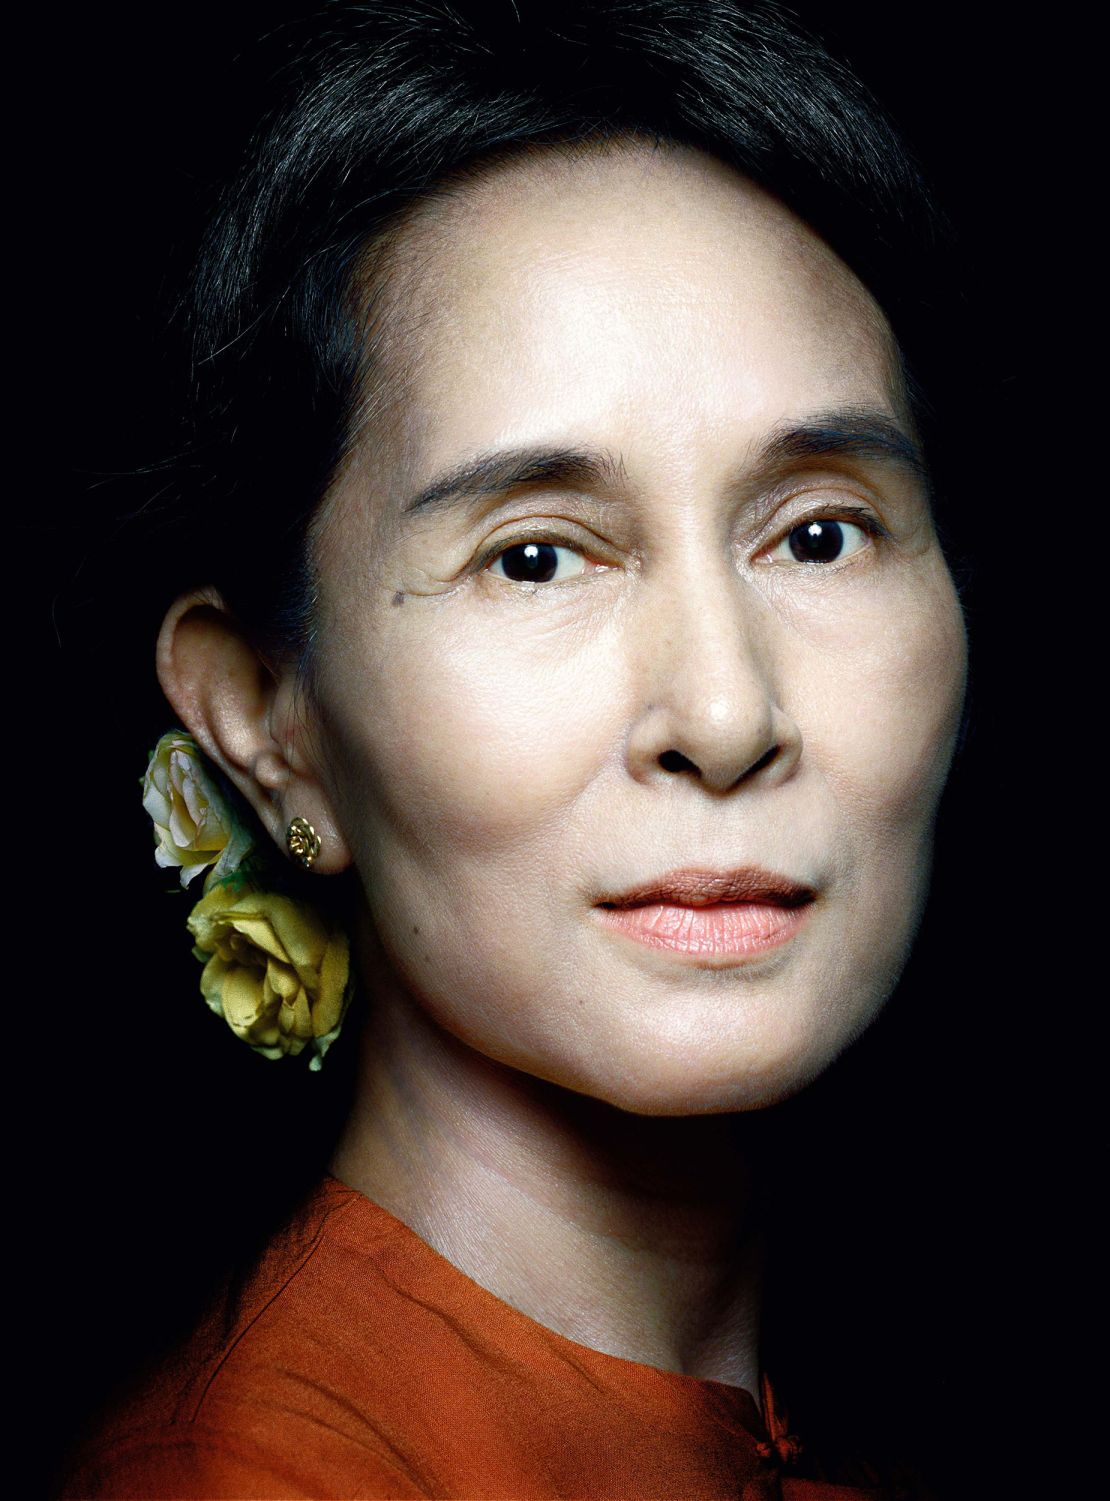 Platon photographed Burmese politician and activist Aung San Suu Kyi in 2010, shortly after she was released from nearly 15 years of house arrest.